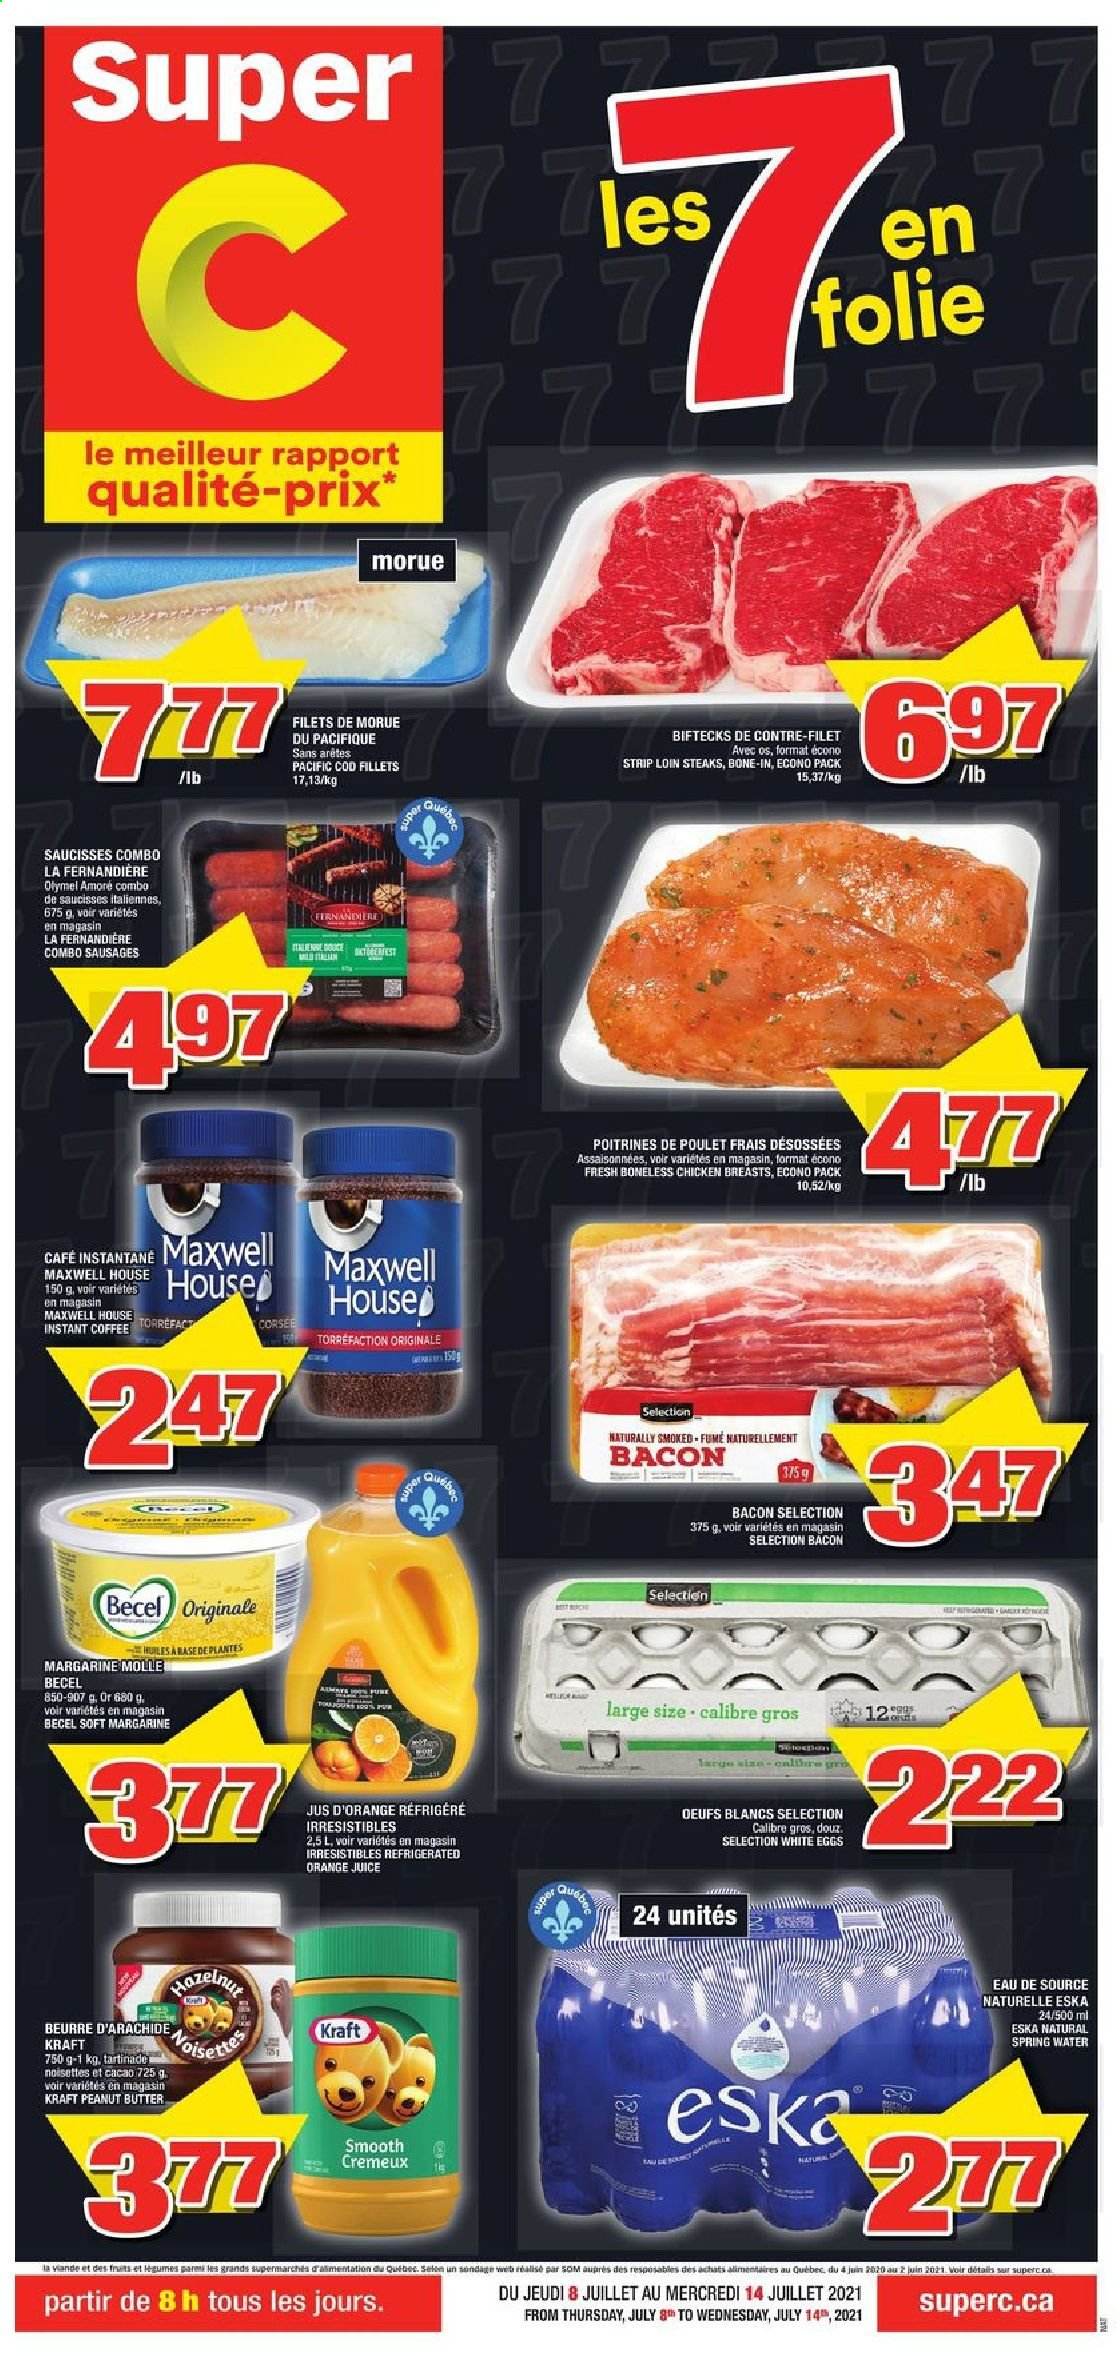 thumbnail - Super C Flyer - July 08, 2021 - July 14, 2021 - Sales products - cod, Kraft®, bacon, sausage, eggs, margarine, peanut butter, orange juice, juice, spring water, Maxwell House, instant coffee, chicken breasts, steak. Page 1.